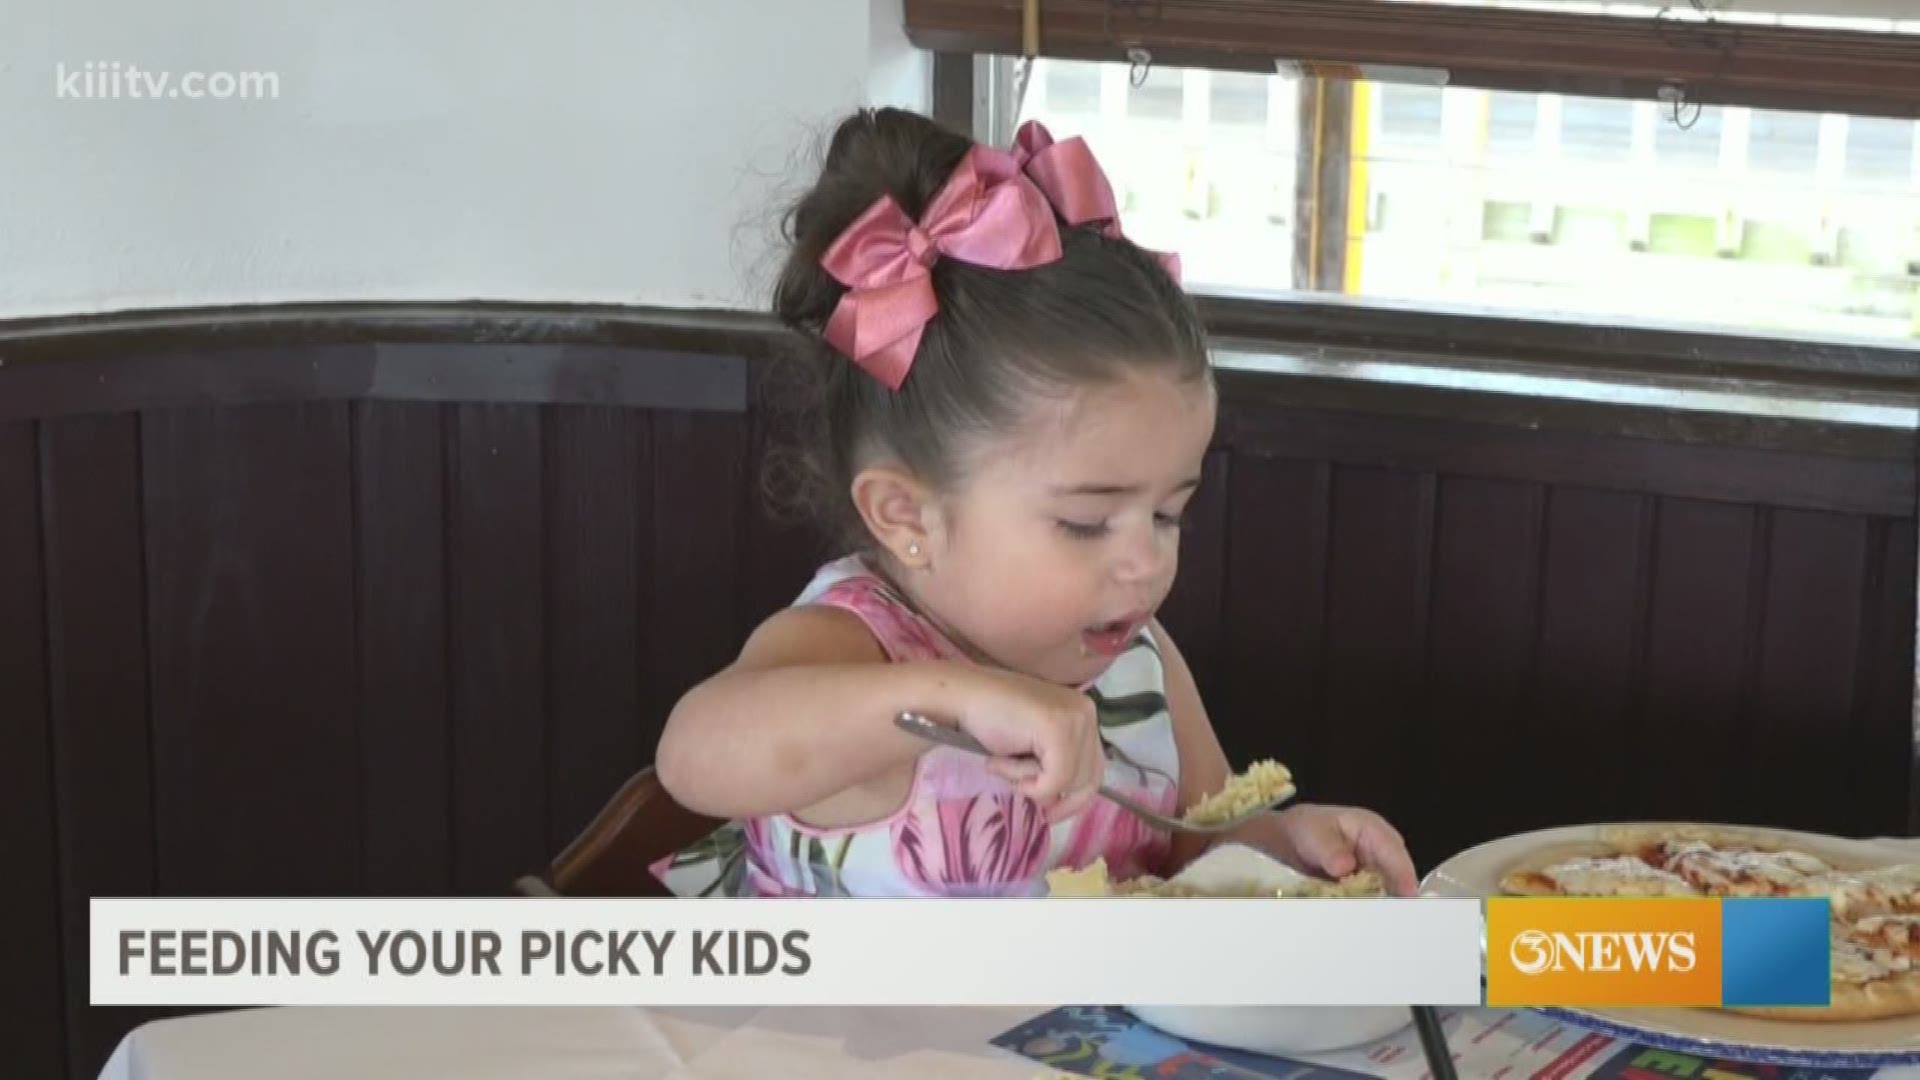 We speak to a local pediatric dietitian on how to get through that picky stage and feed our families the right way.